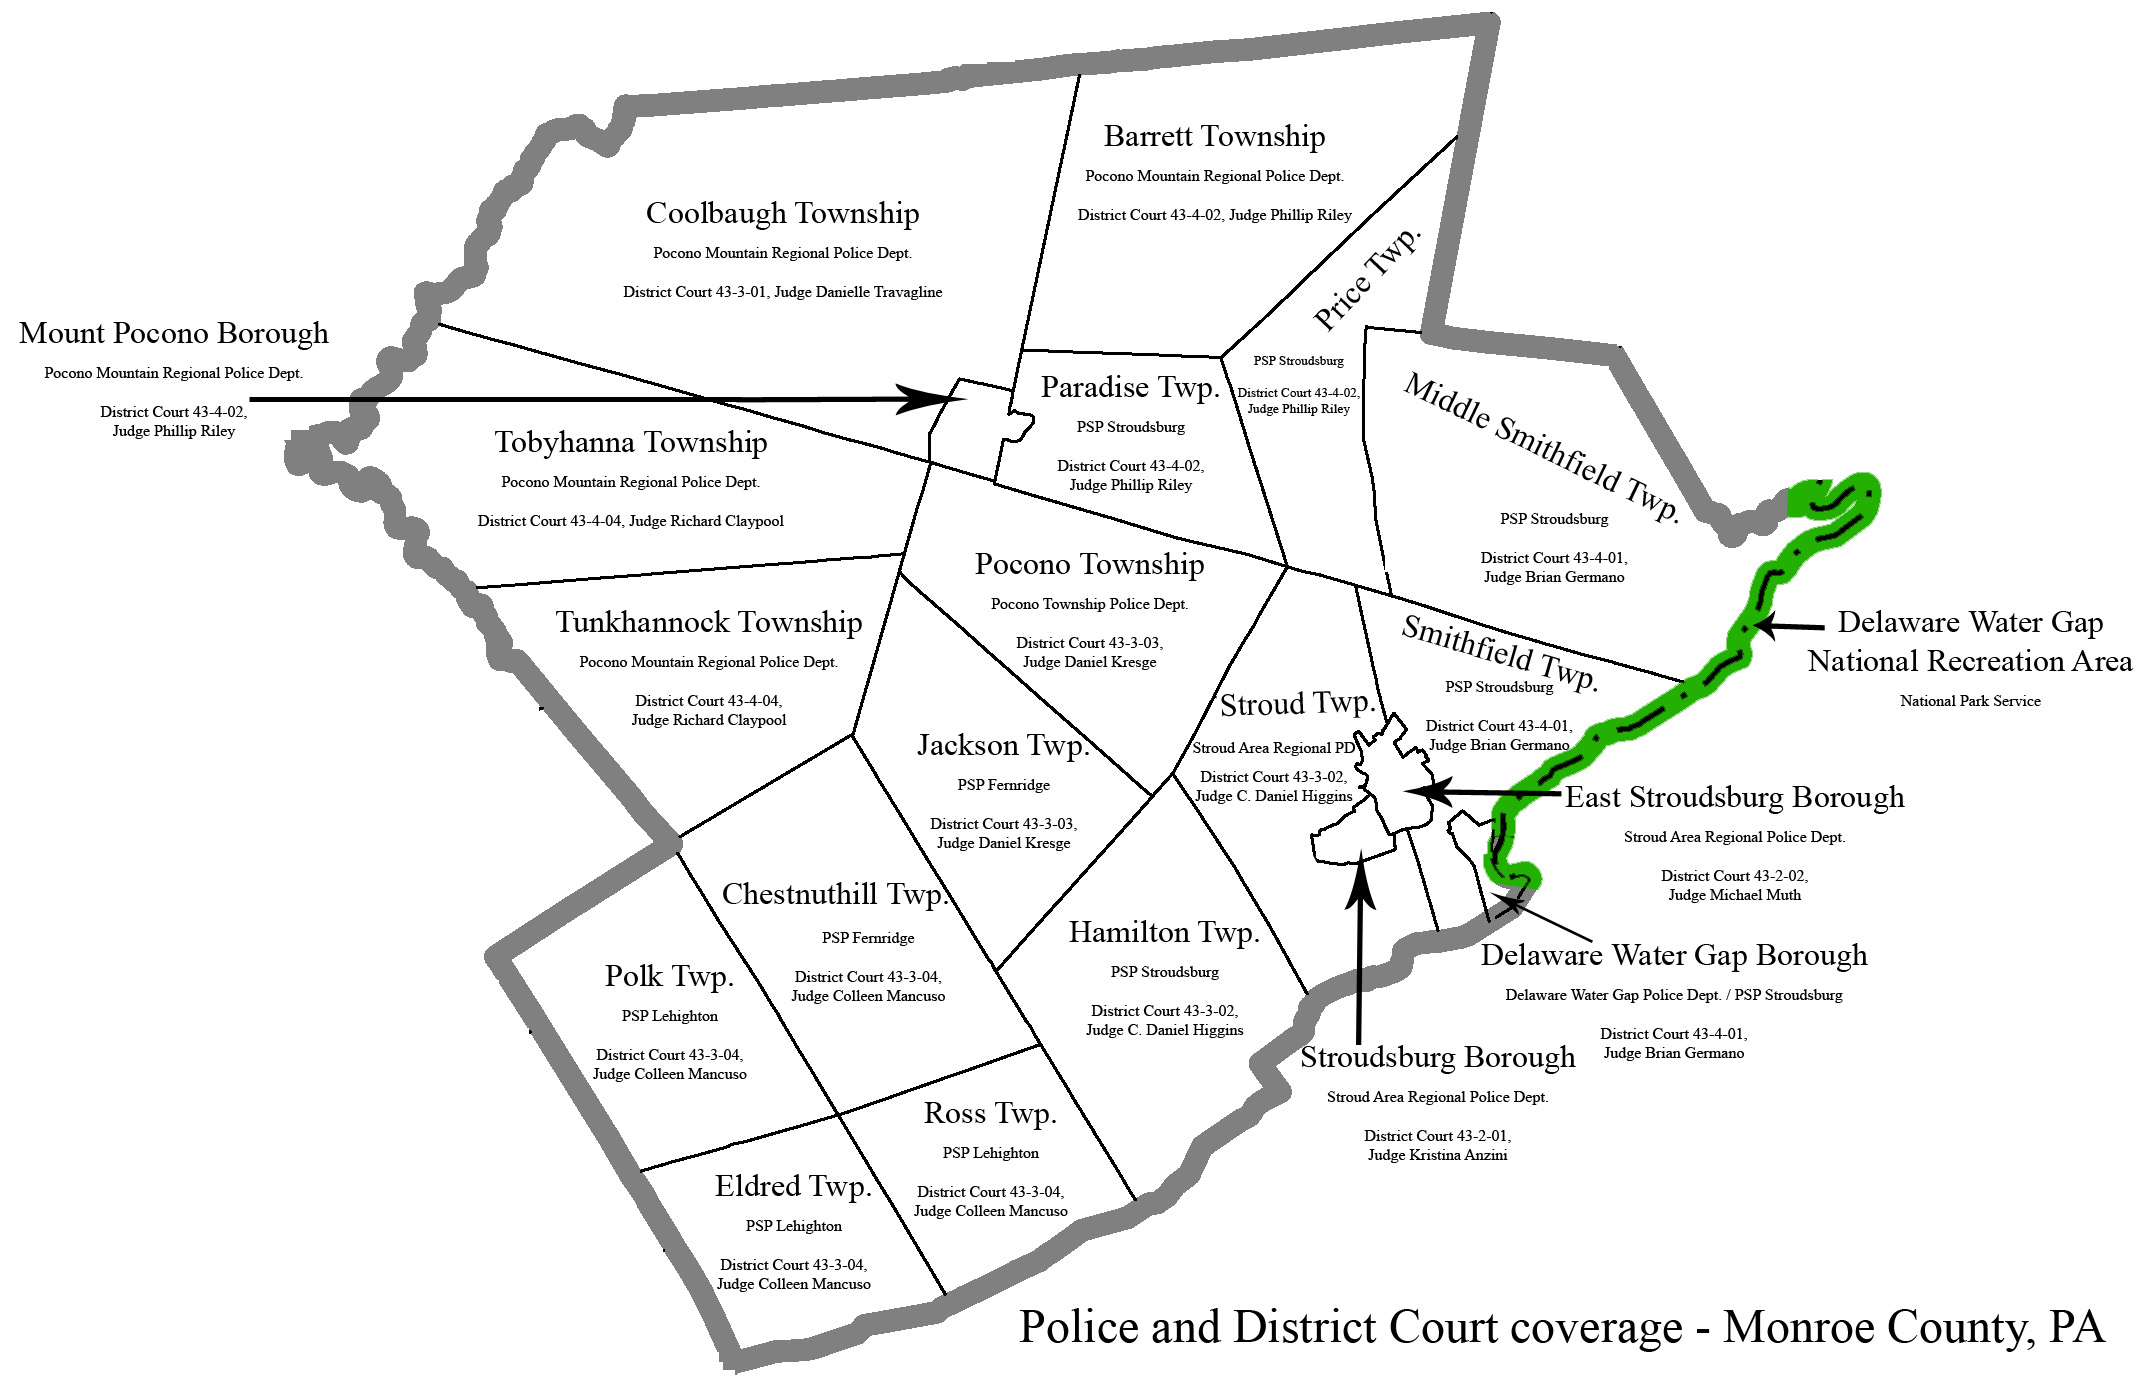 Map of Monroe County police and district court jurisdictions